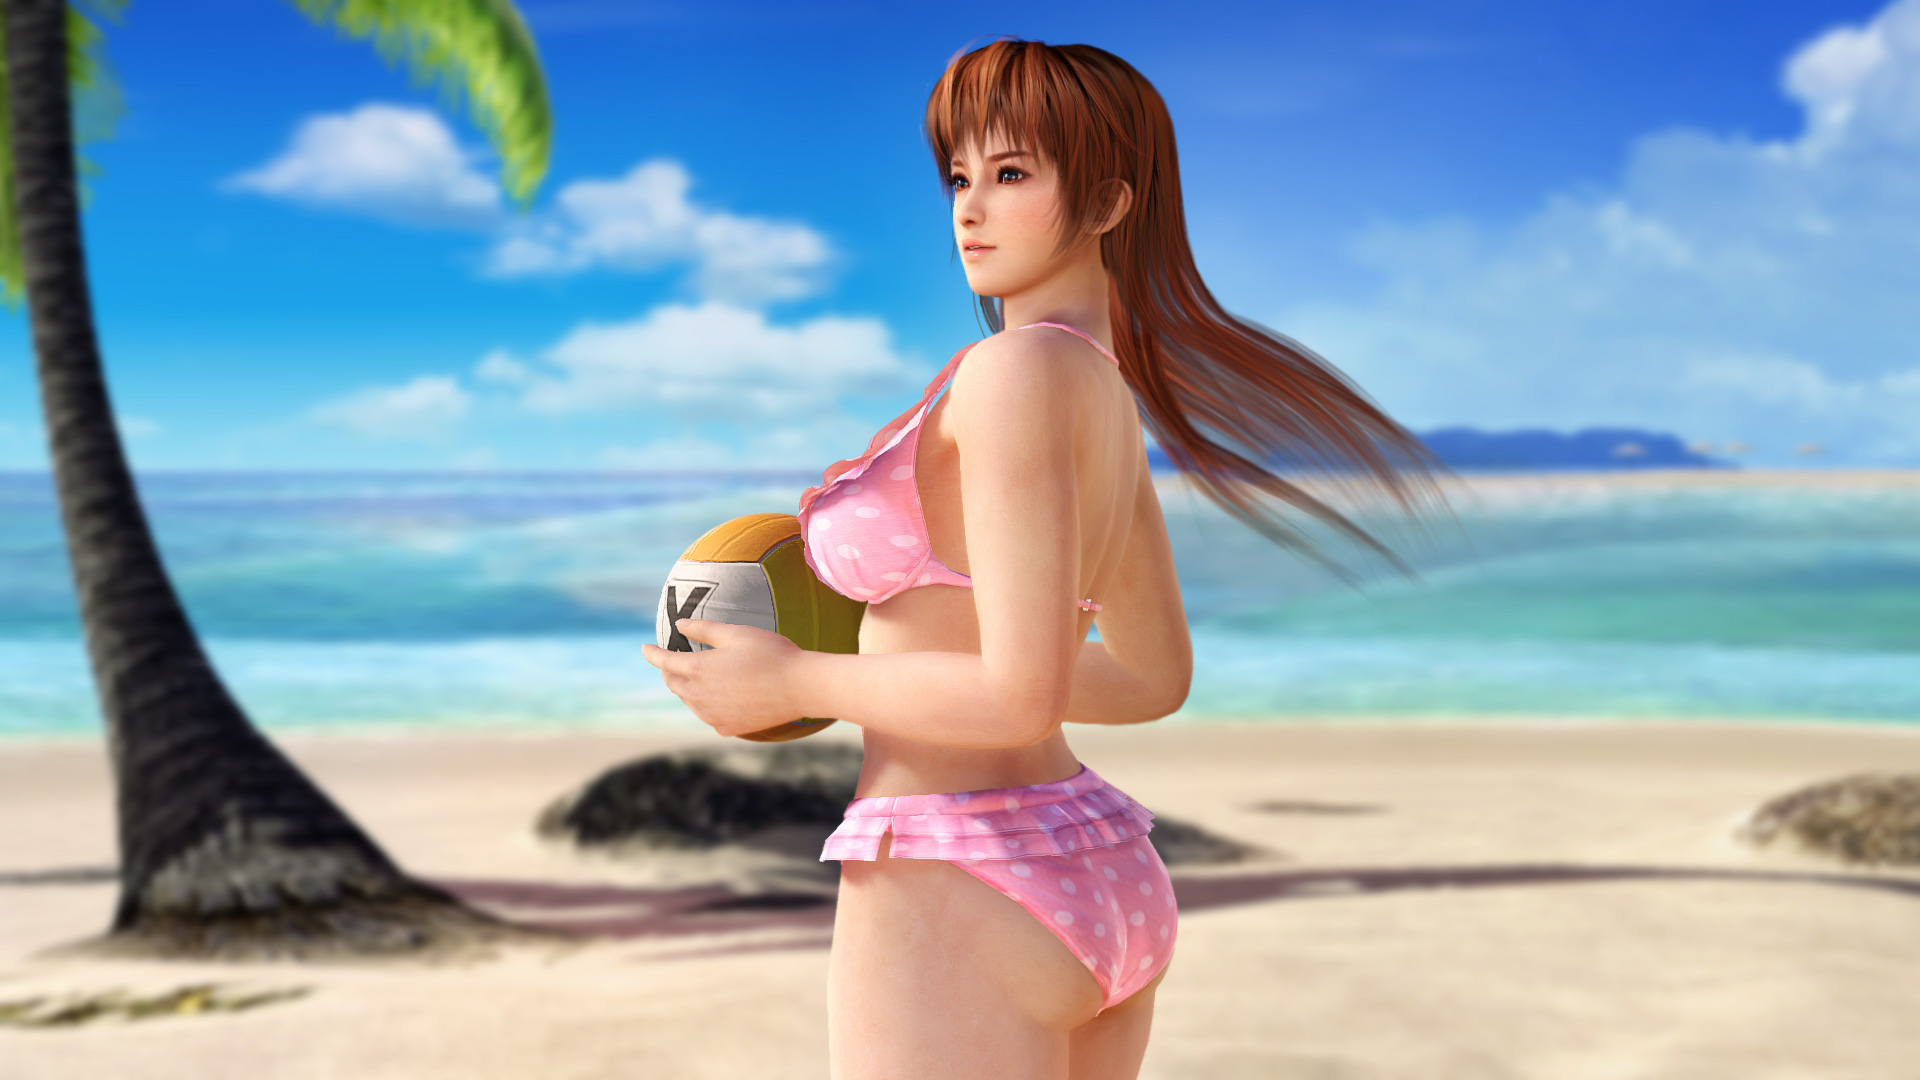 Dead or Alive Xtreme 3: Fortune